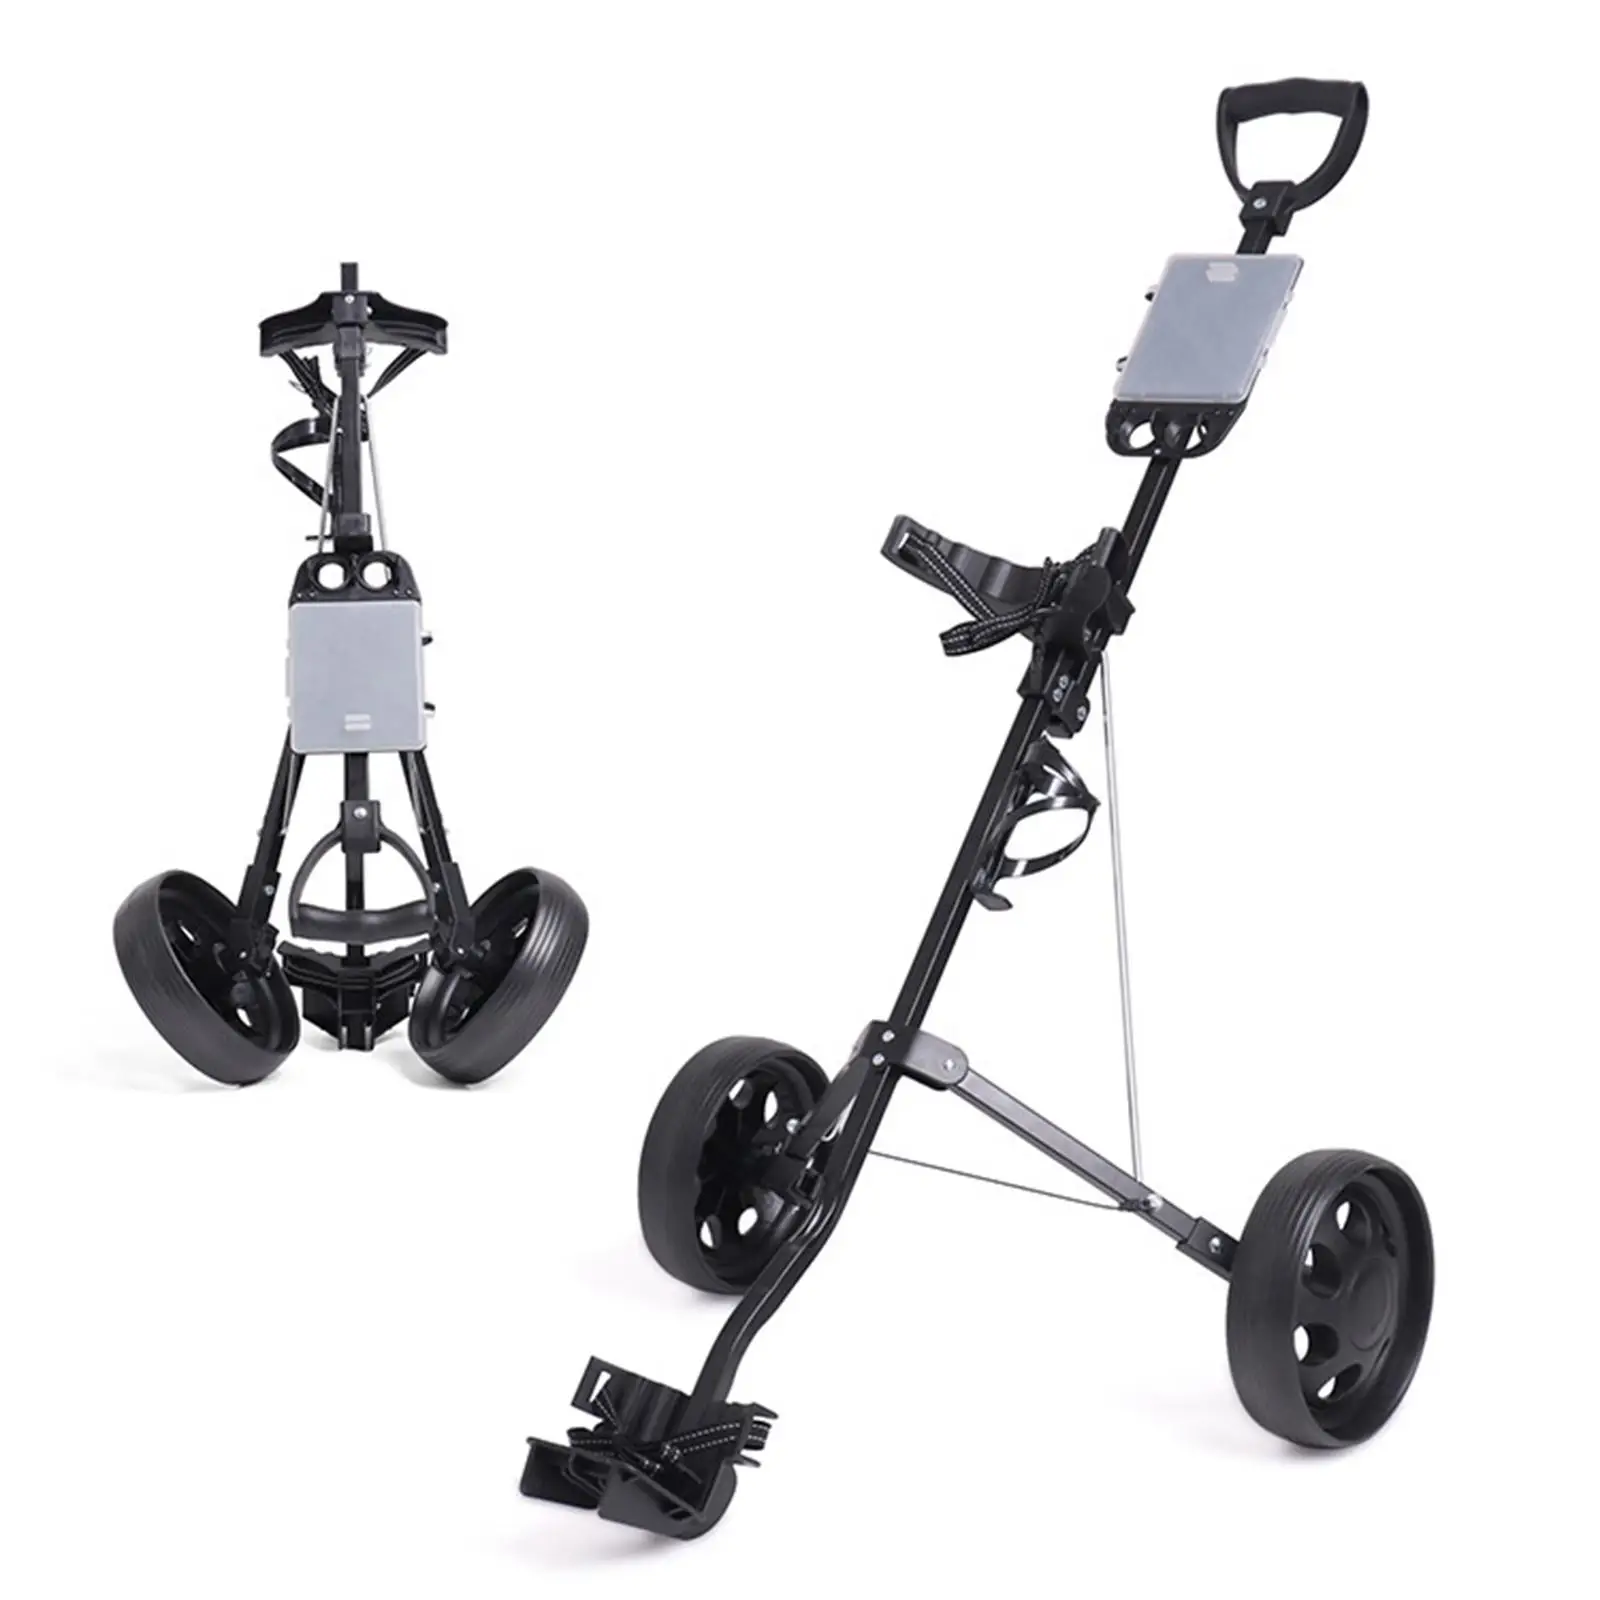 Folding Golf Pull Cart 2 Wheel Adjustable Handle Angle Easy to Carry Collapsible Walking Cart Golf Trolley for Kids